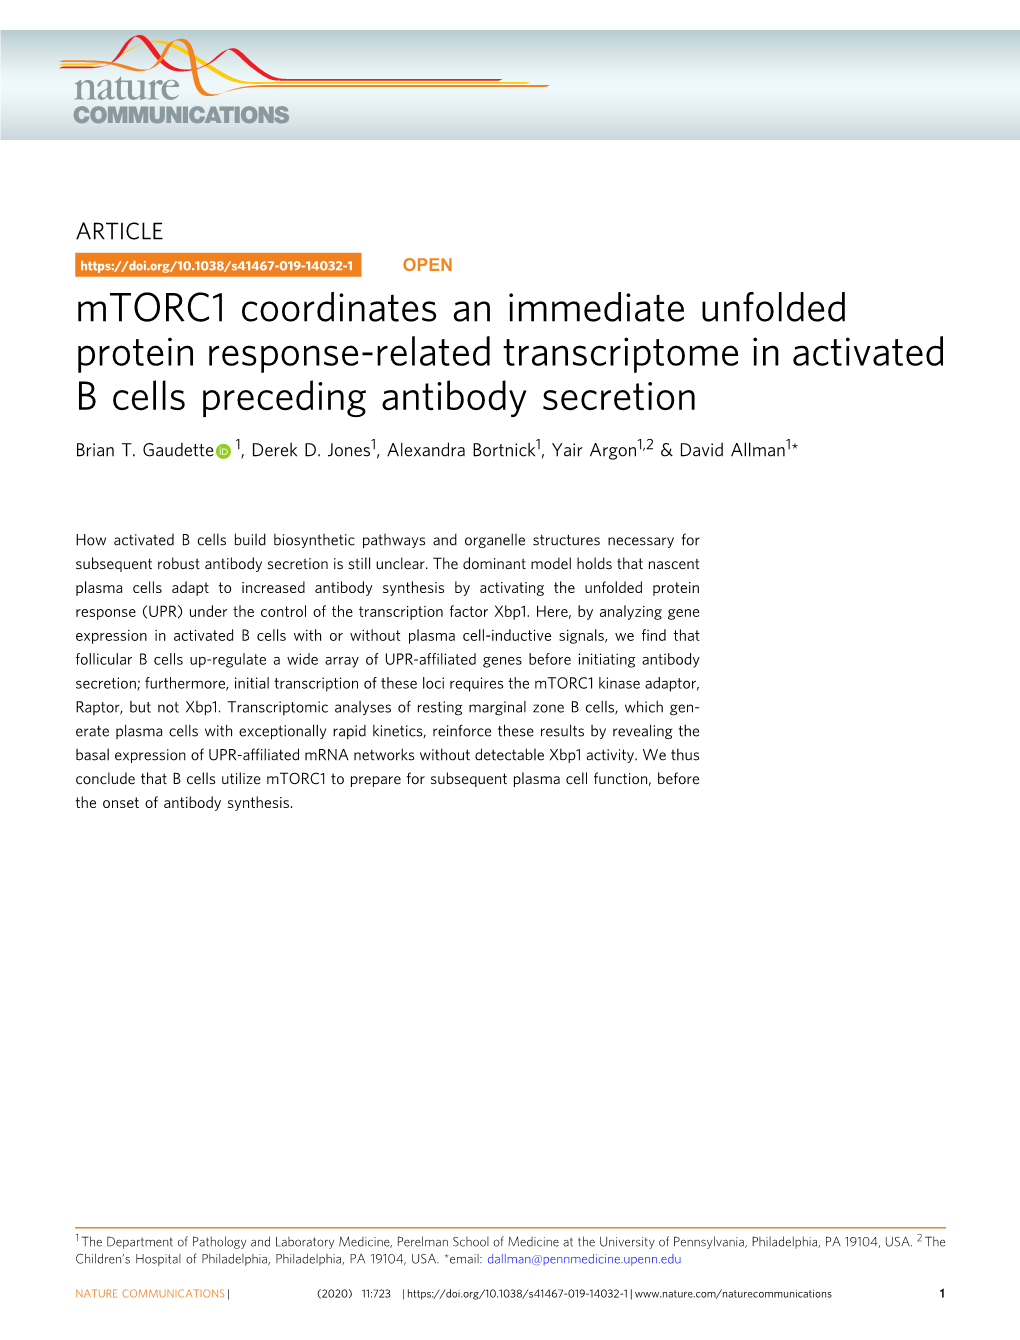 Mtorc1 Coordinates an Immediate Unfolded Protein Response-Related Transcriptome in Activated B Cells Preceding Antibody Secretion